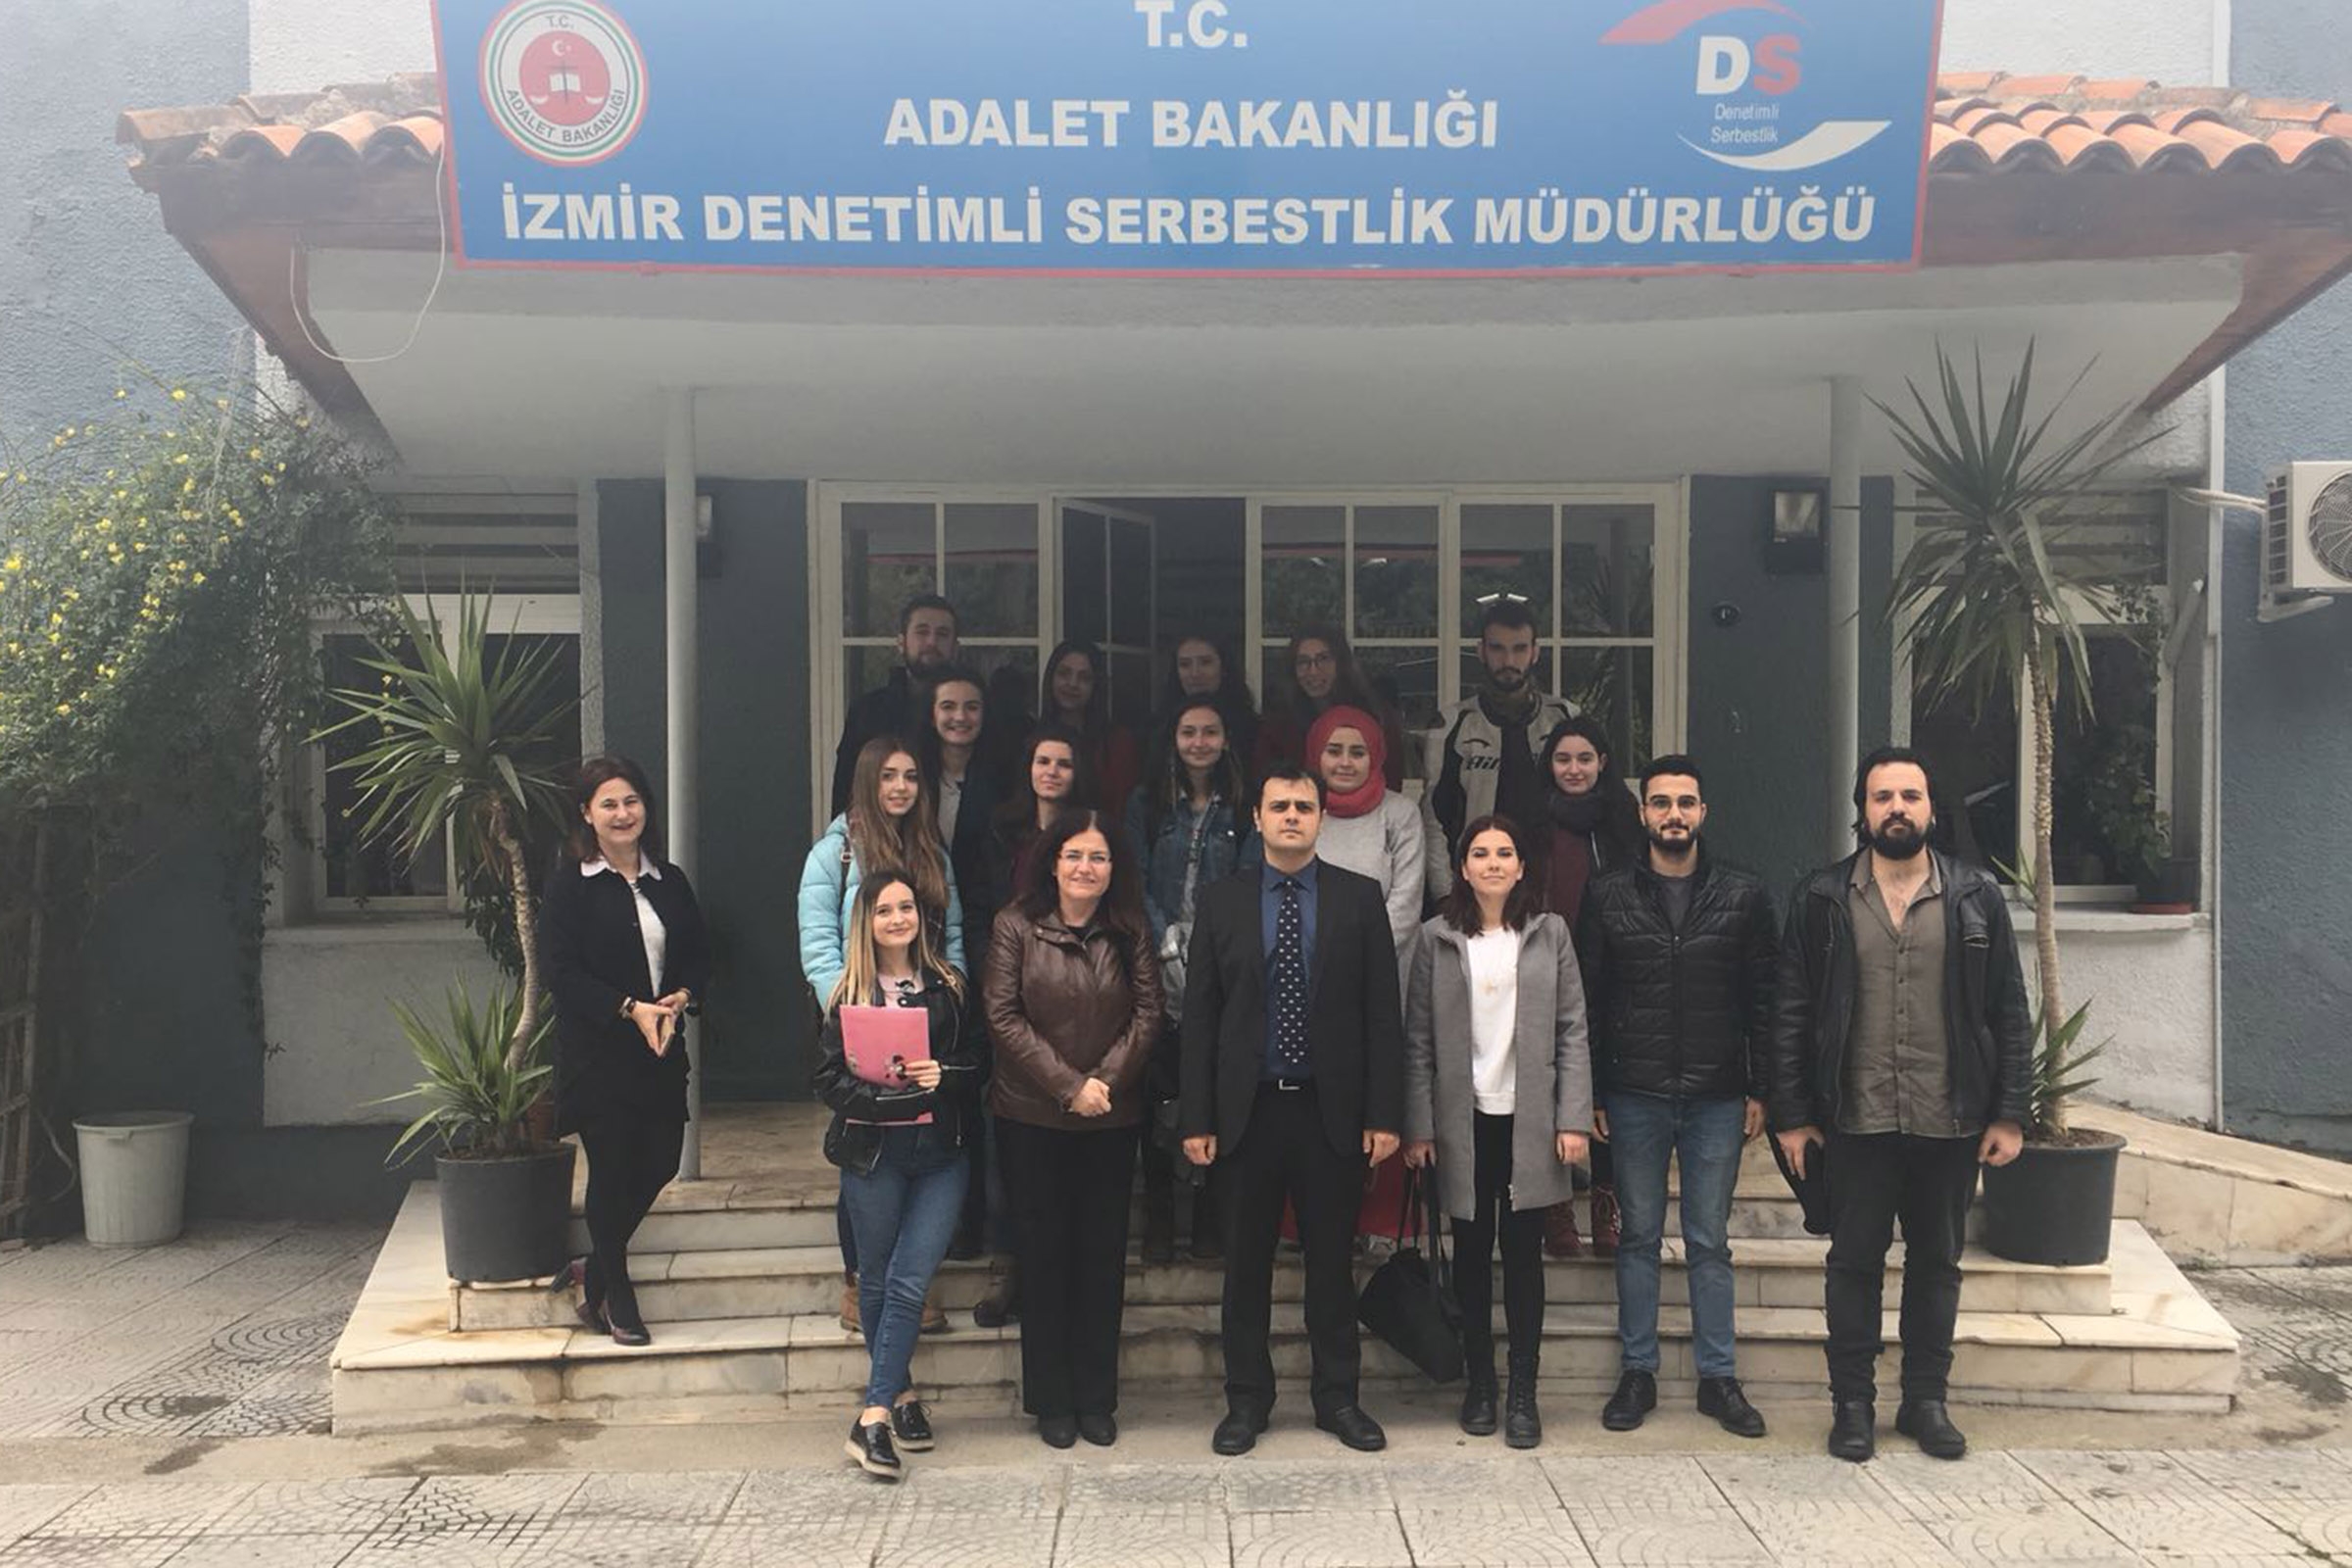 MONITORING VISIT BY IUE SOCIOLOGISTS